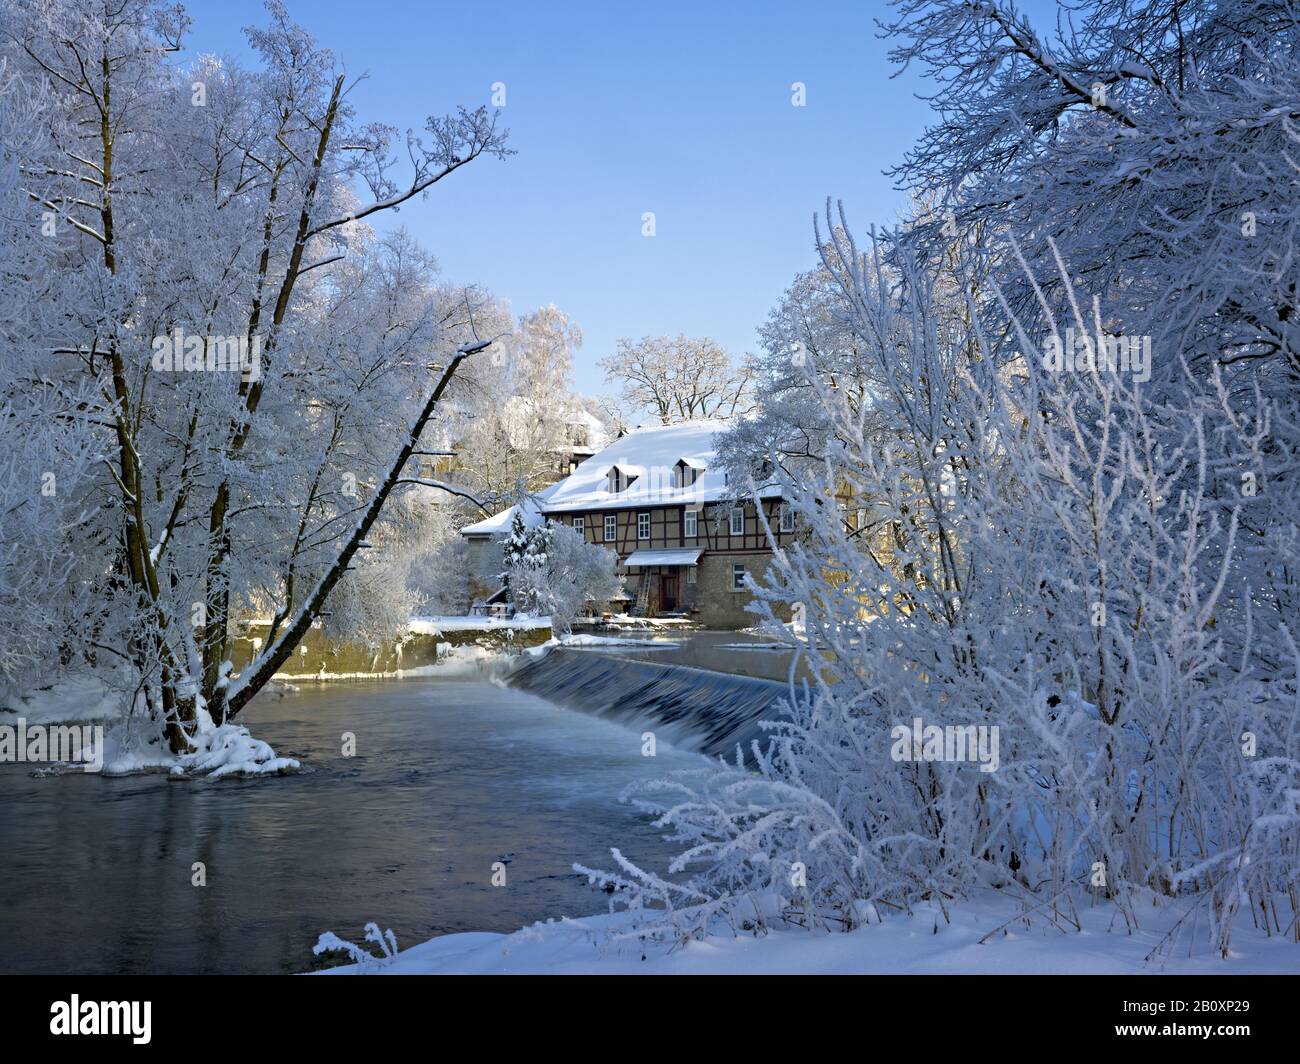 Watermill on the Ilm in Taubach near Weimar, Thuringia, Germany, Stock Photo